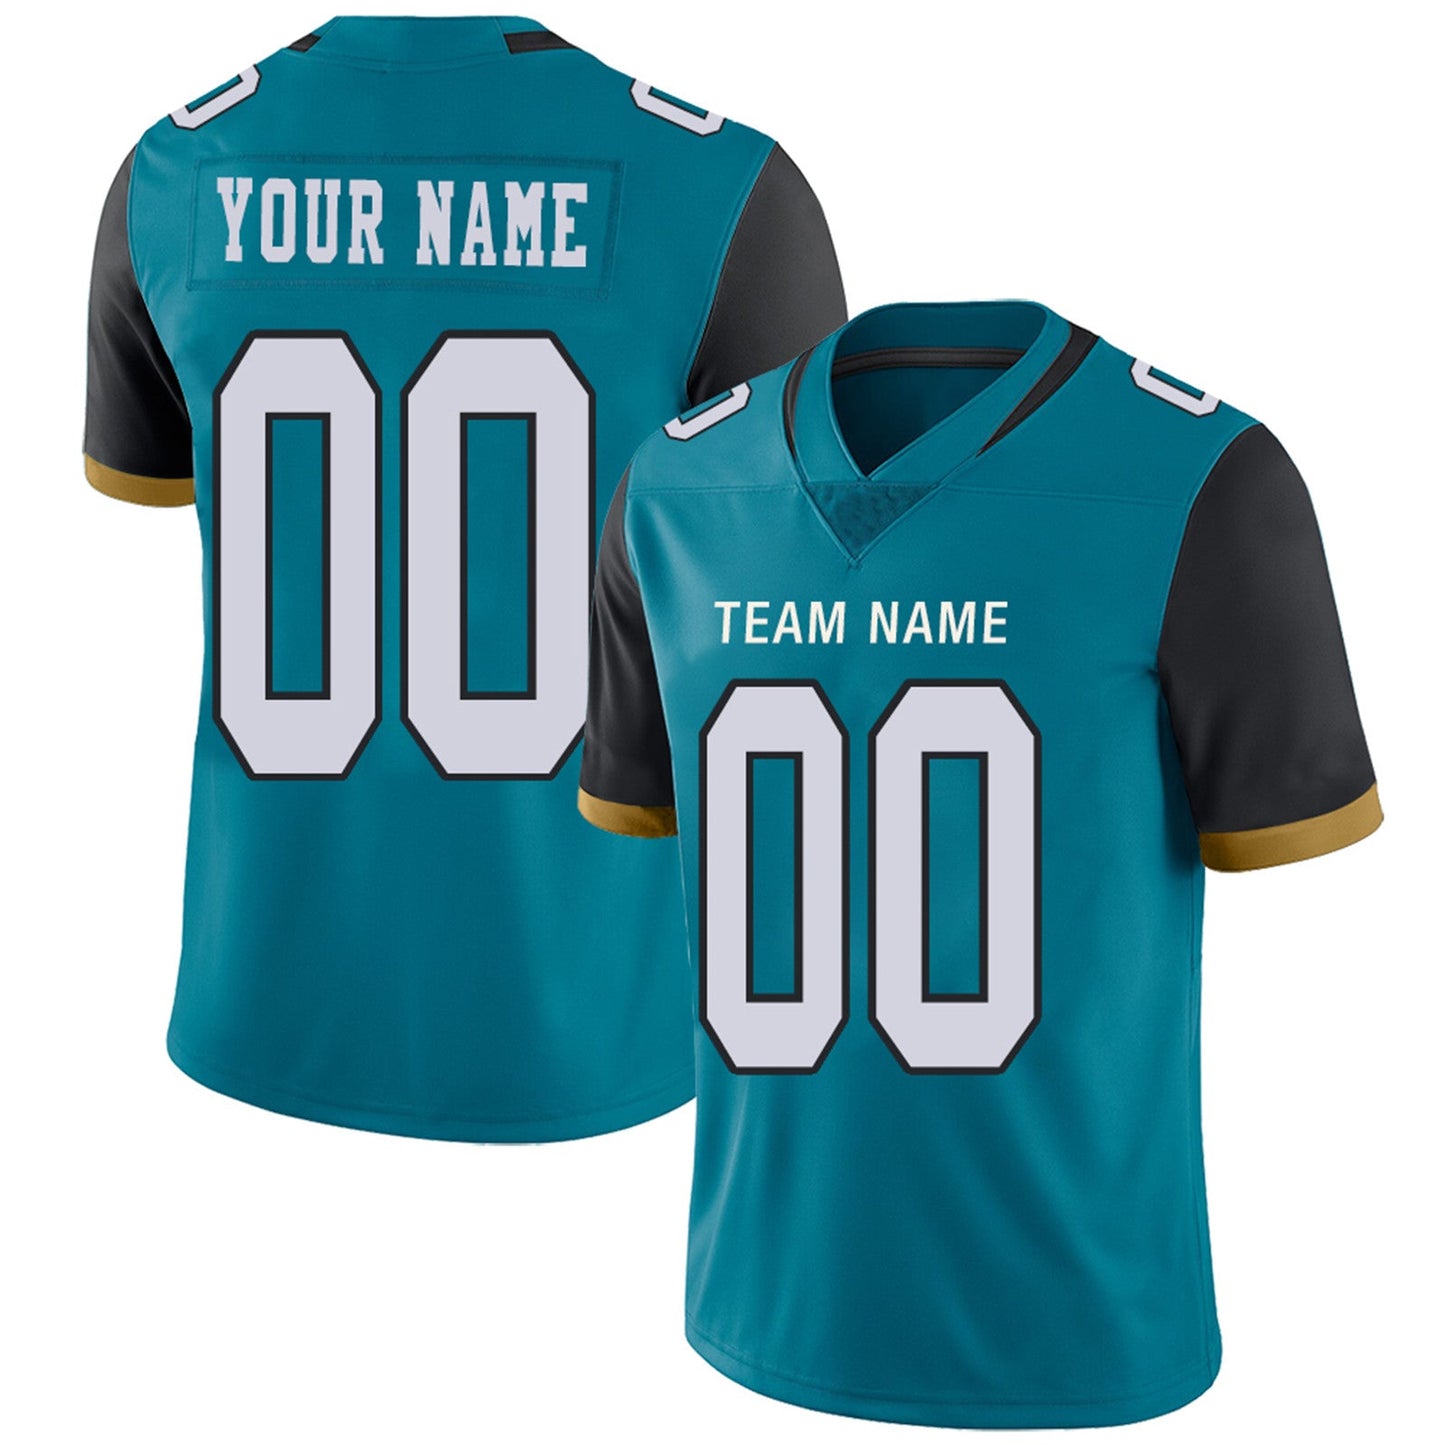 Custom J.Jaguars Football Jerseys Team Player or Personalized Design Your Own Name for Men's Women's Youth Jerseys Teal